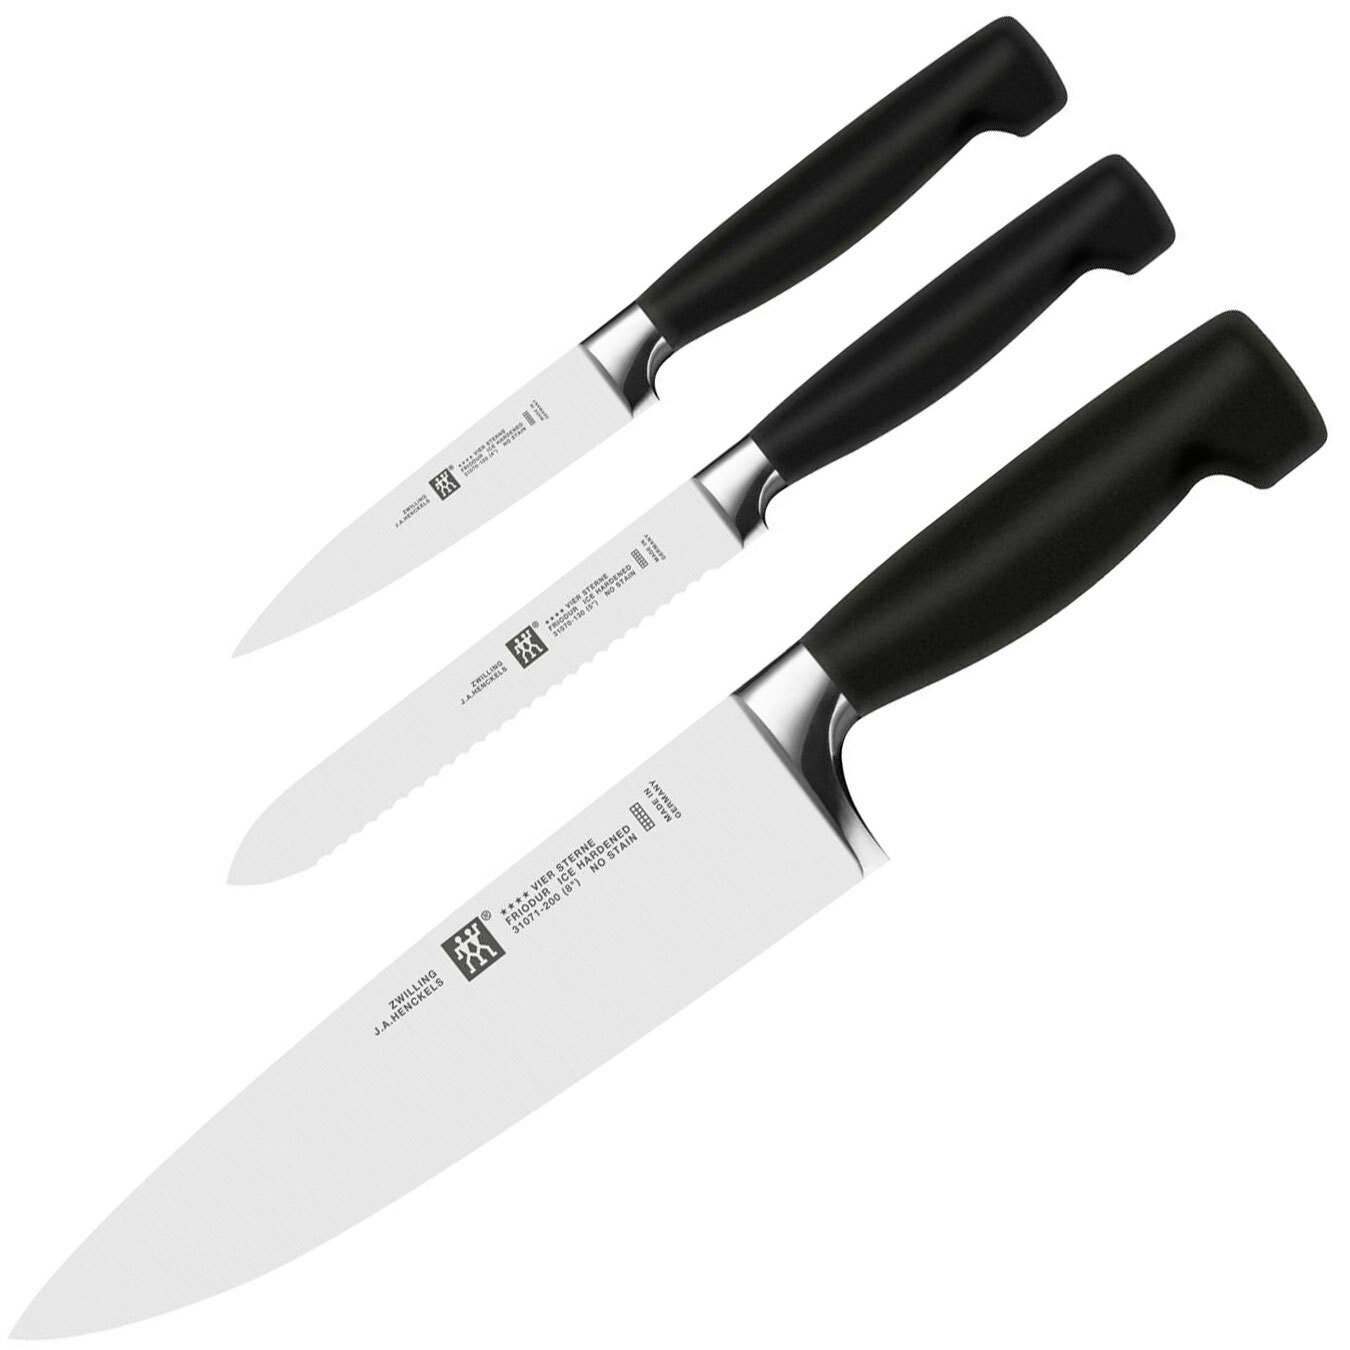    3 . Four Star, Zwilling, 35168-100